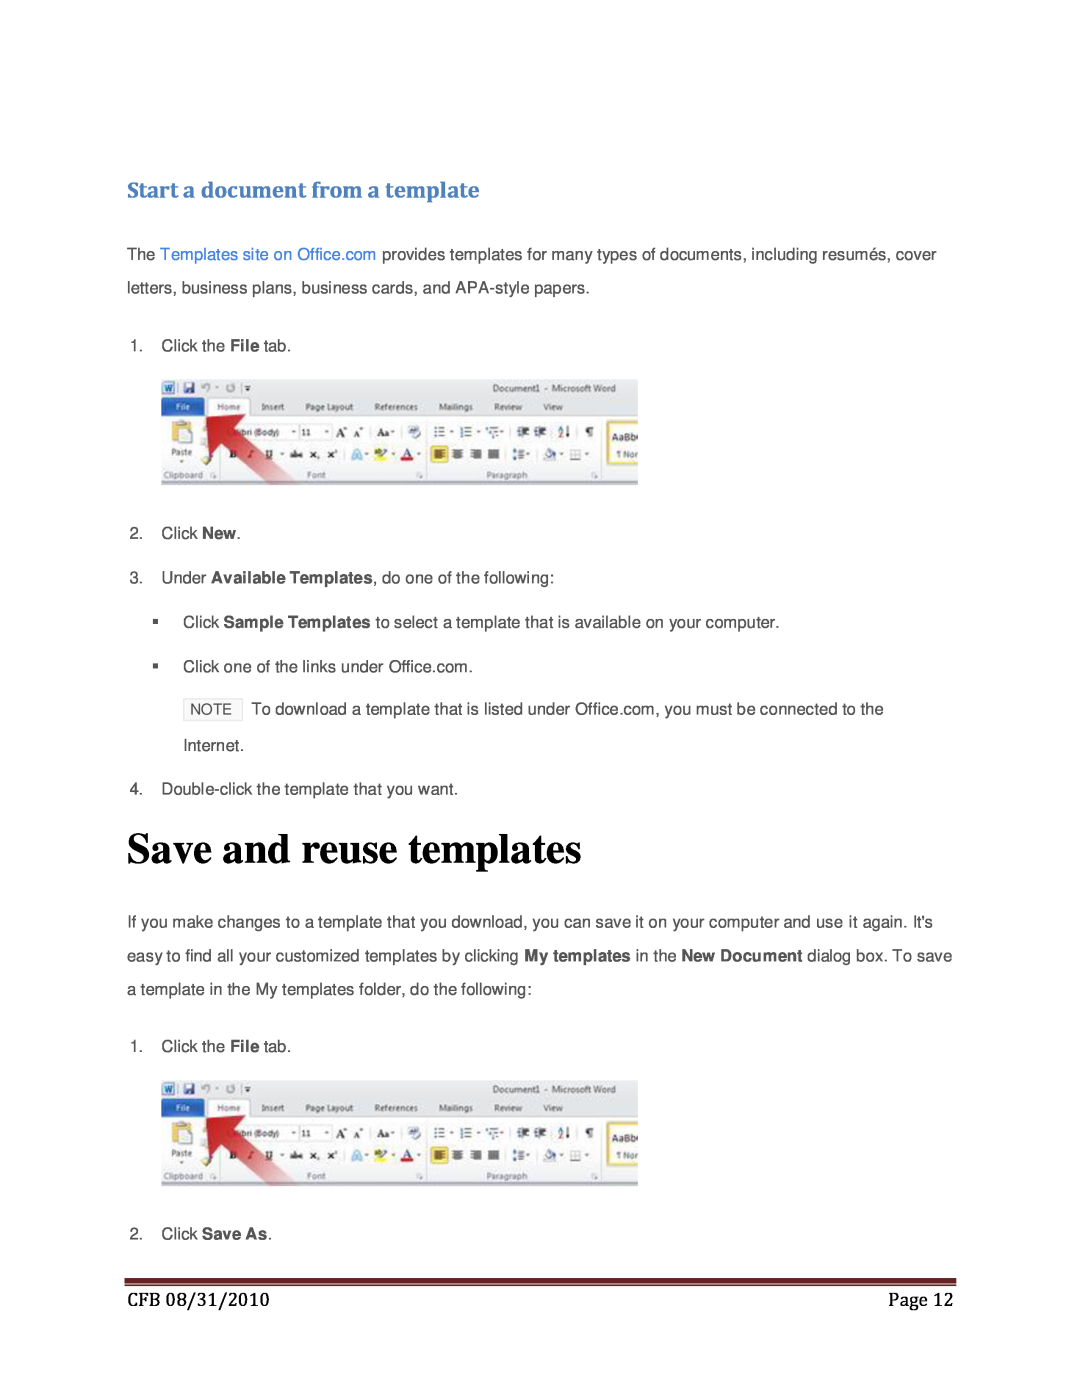 Microsoft T5D-00295, 79G-02020, 269-14457 Save and reuse templates, Start a document from a template, CFB 08/31/2010, Page 